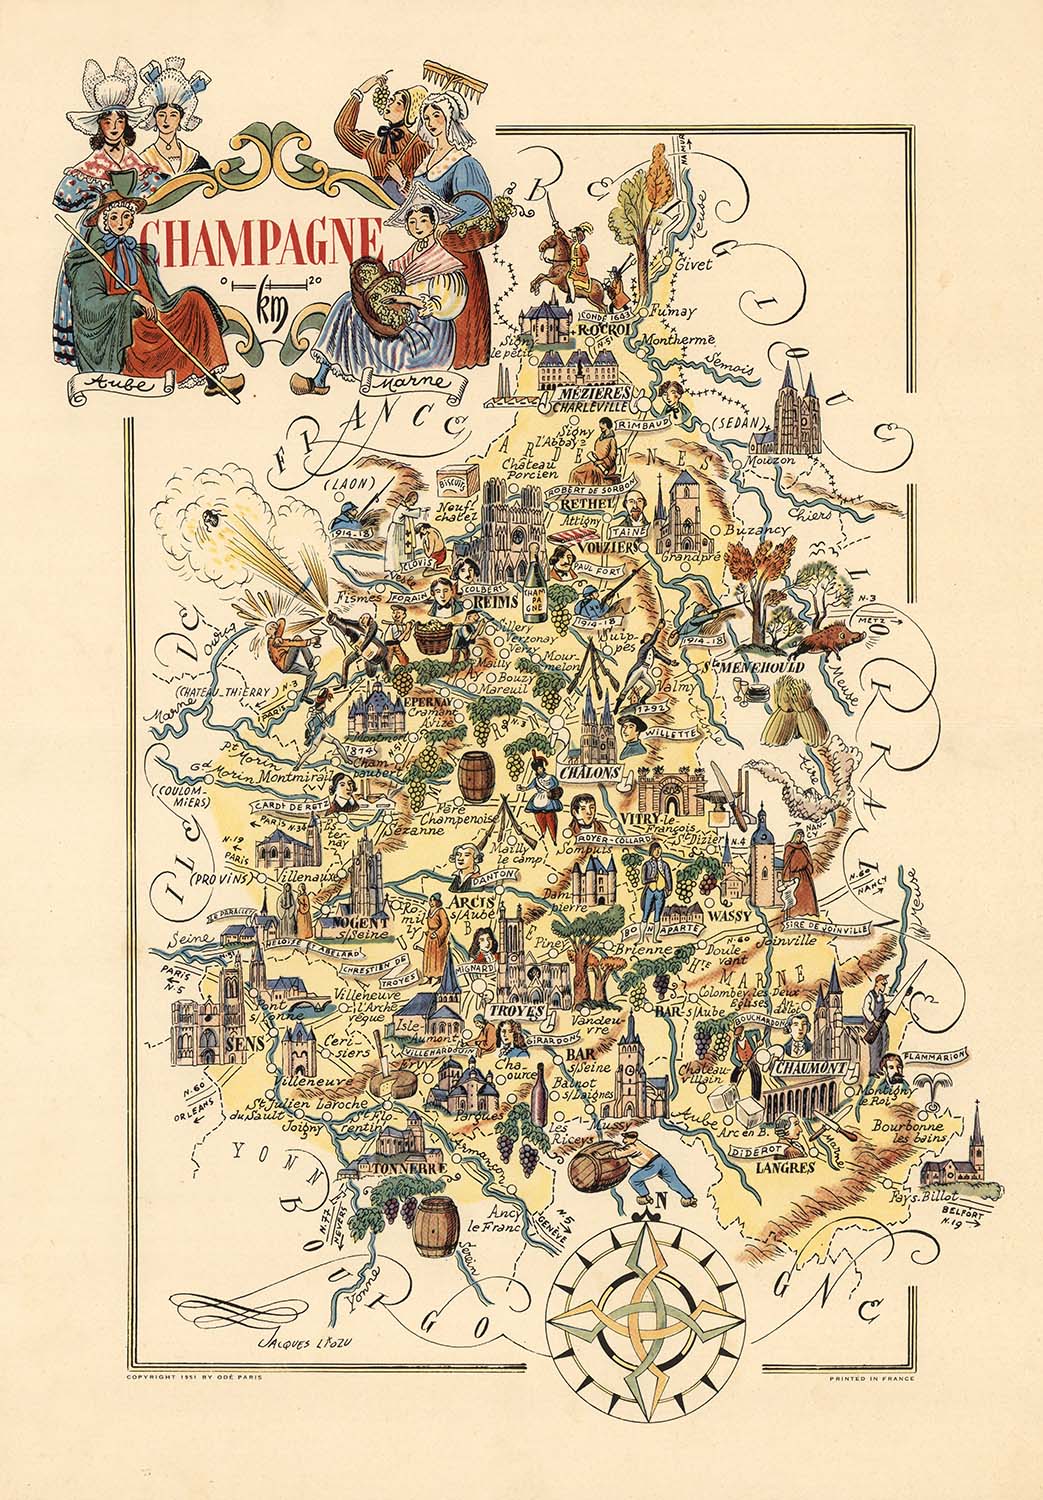 Old Pictorial Map of Champagne by Liozu, 1951: Reims, Troyes, Marne River, Ardennes Forest, Argonne Forest.